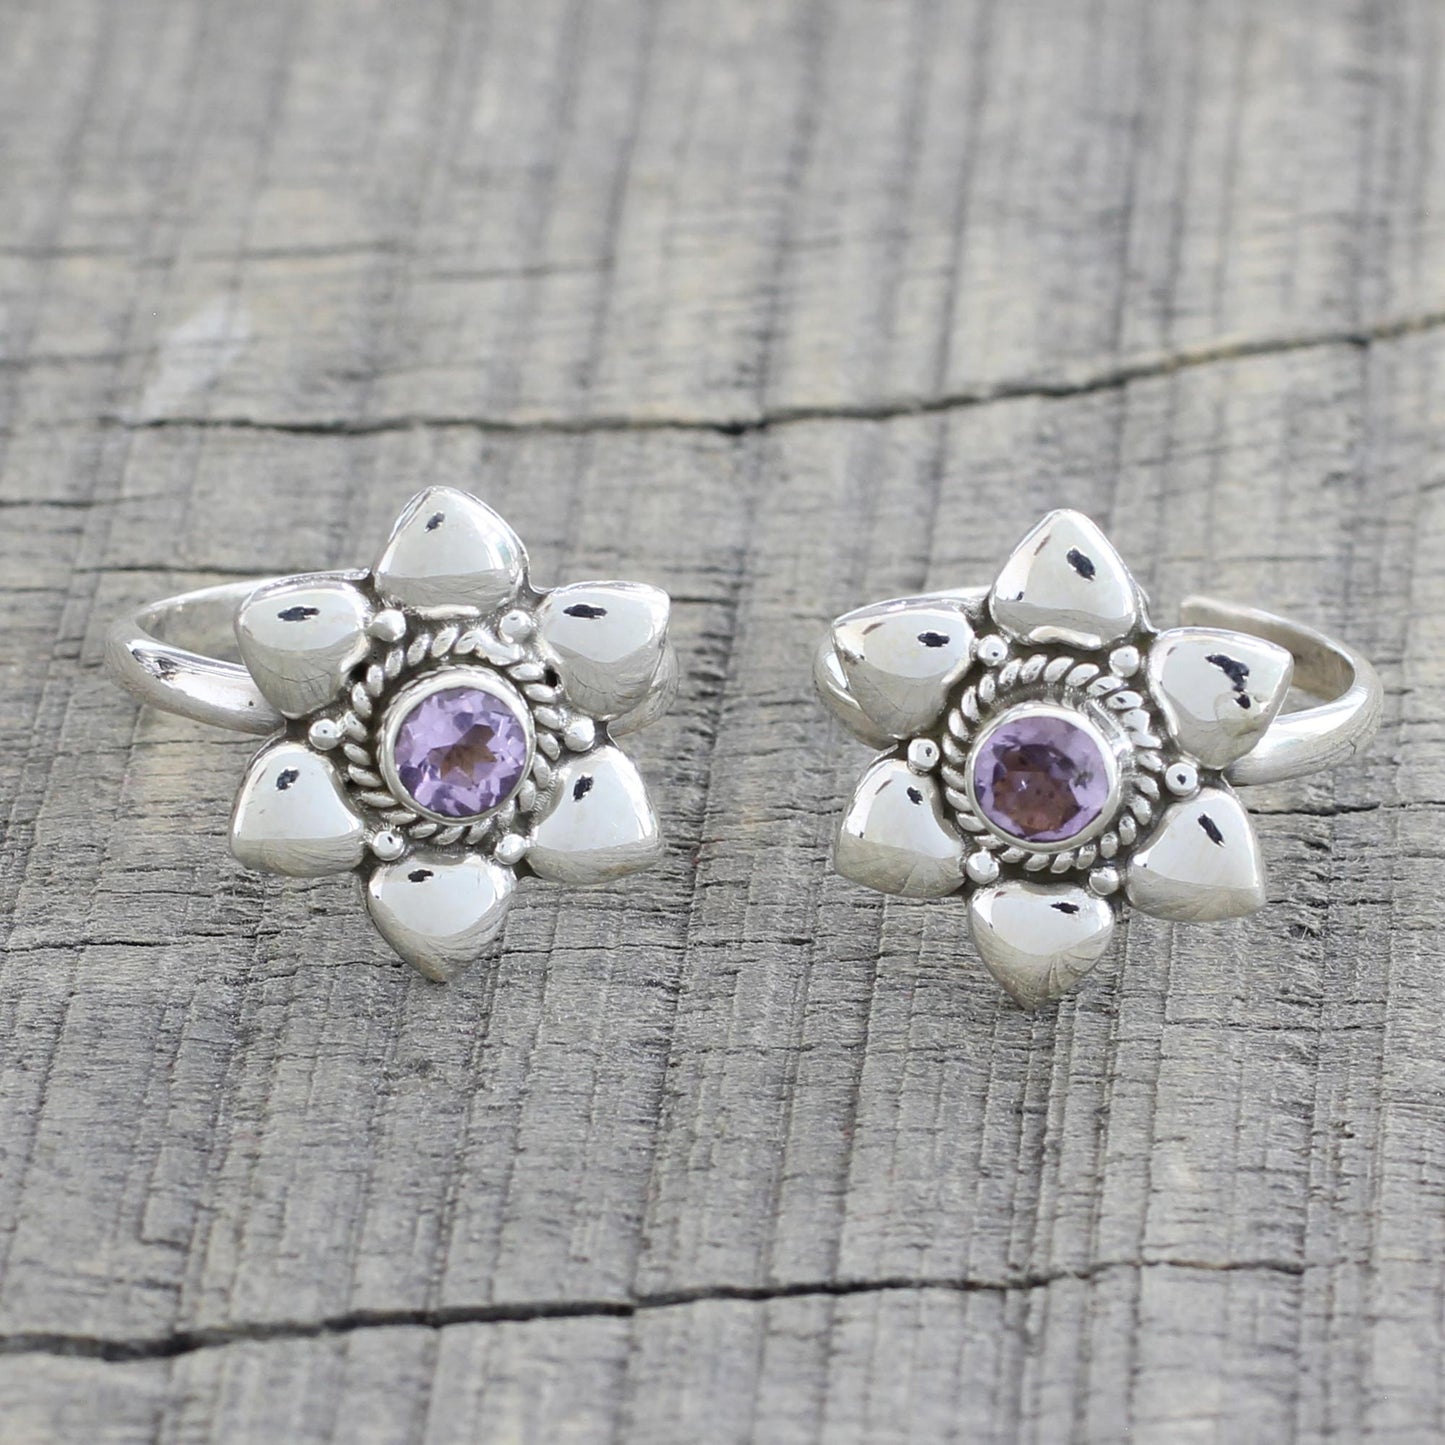 Floral Gleam Two Floral Amethyst and 925 Silver Toe Rings from India